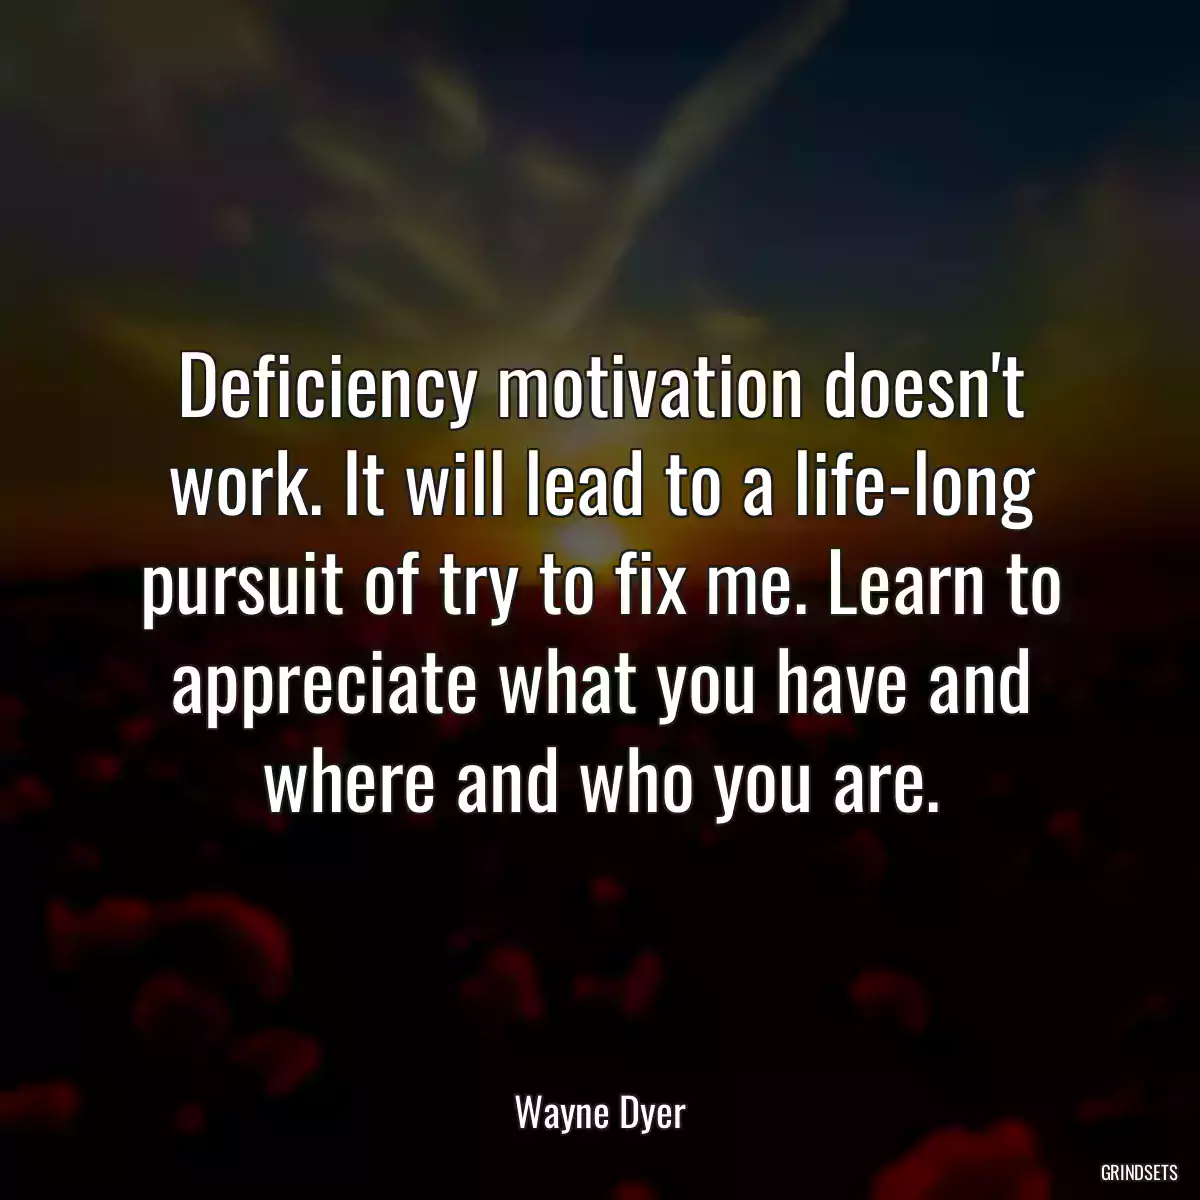 Deficiency motivation doesn\'t work. It will lead to a life-long pursuit of try to fix me. Learn to appreciate what you have and where and who you are.